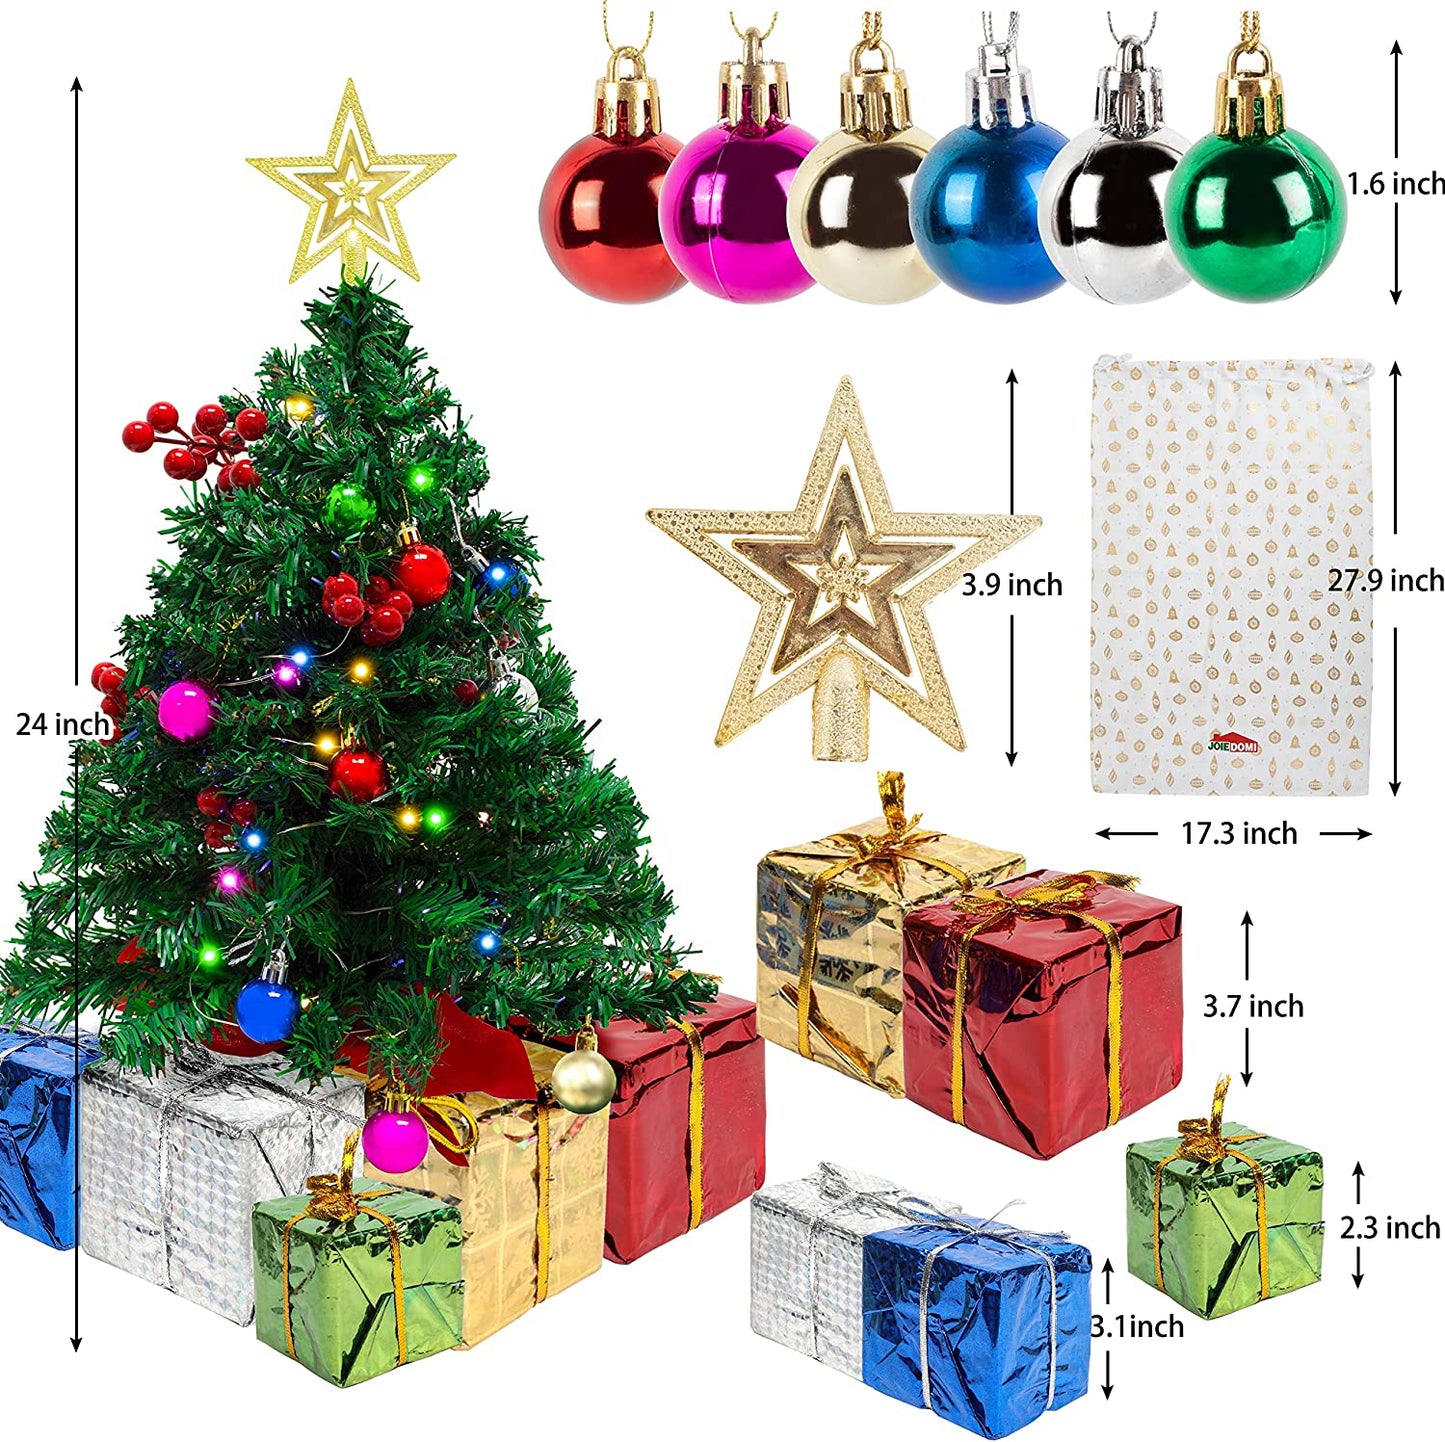 24in Prelit Tabletop Christmas Tree with Decoration Kit and Gift Box Decoration